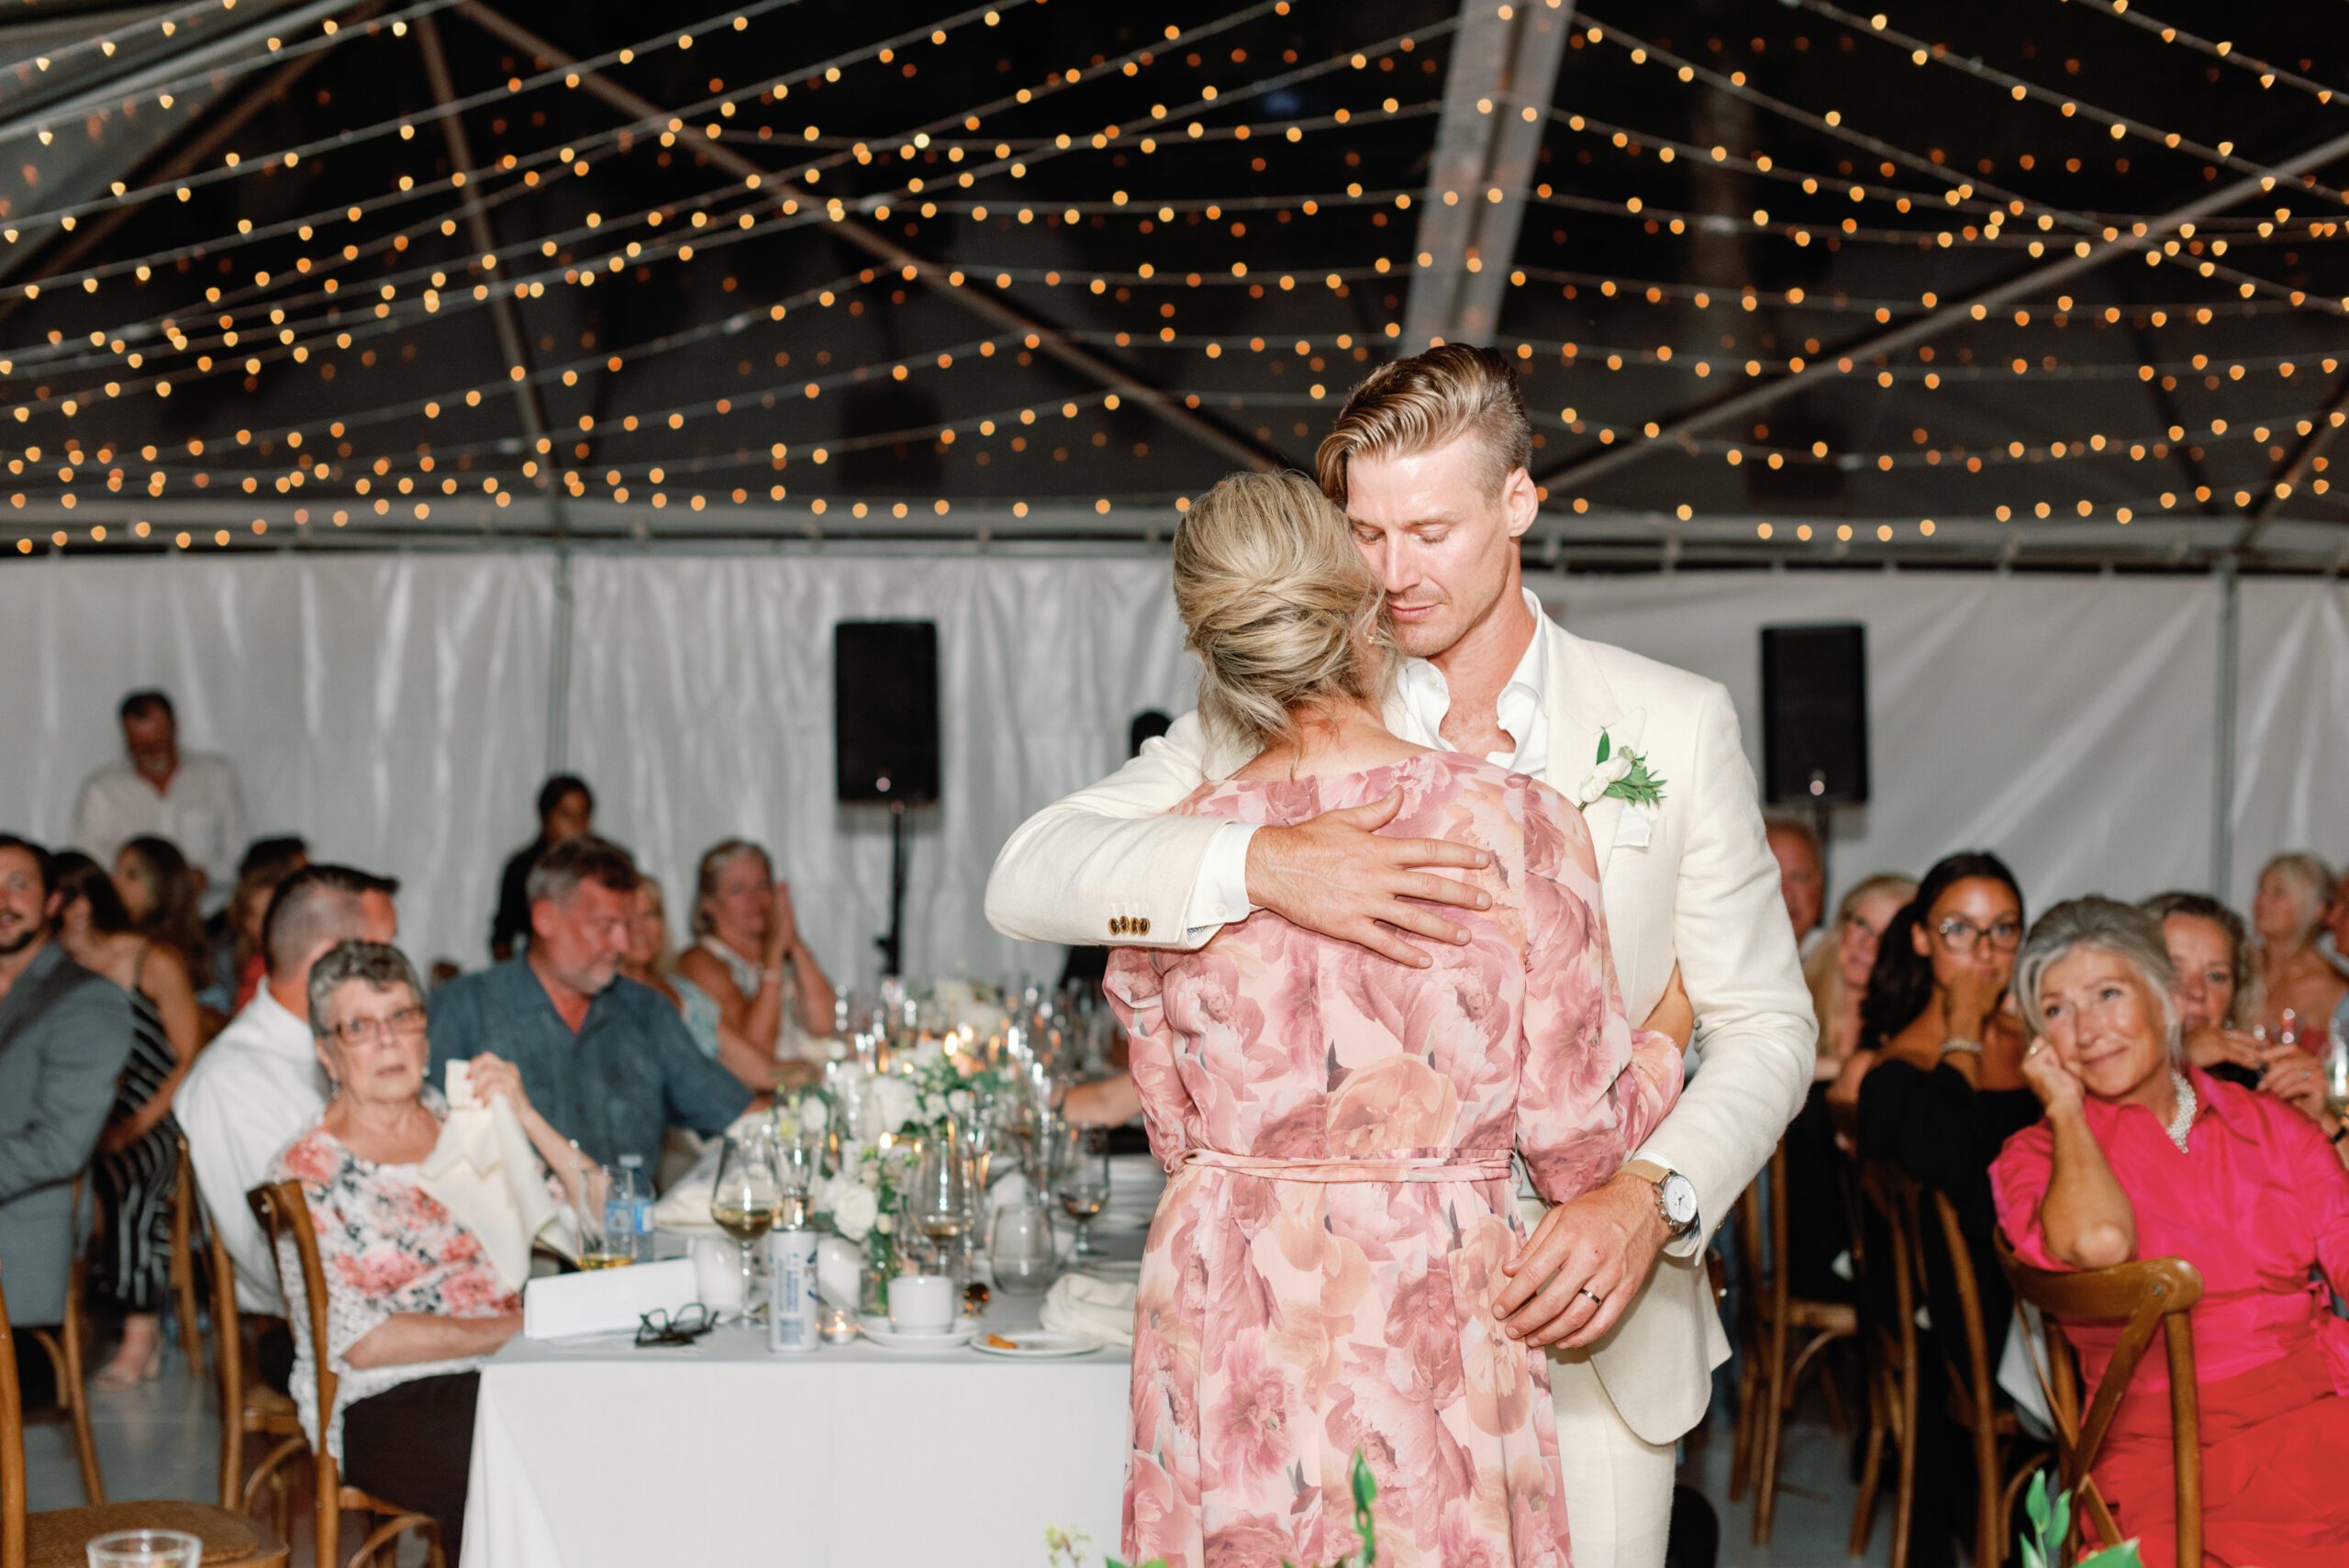 Sweet moment of groom dancing with mother at wedding under string lights.